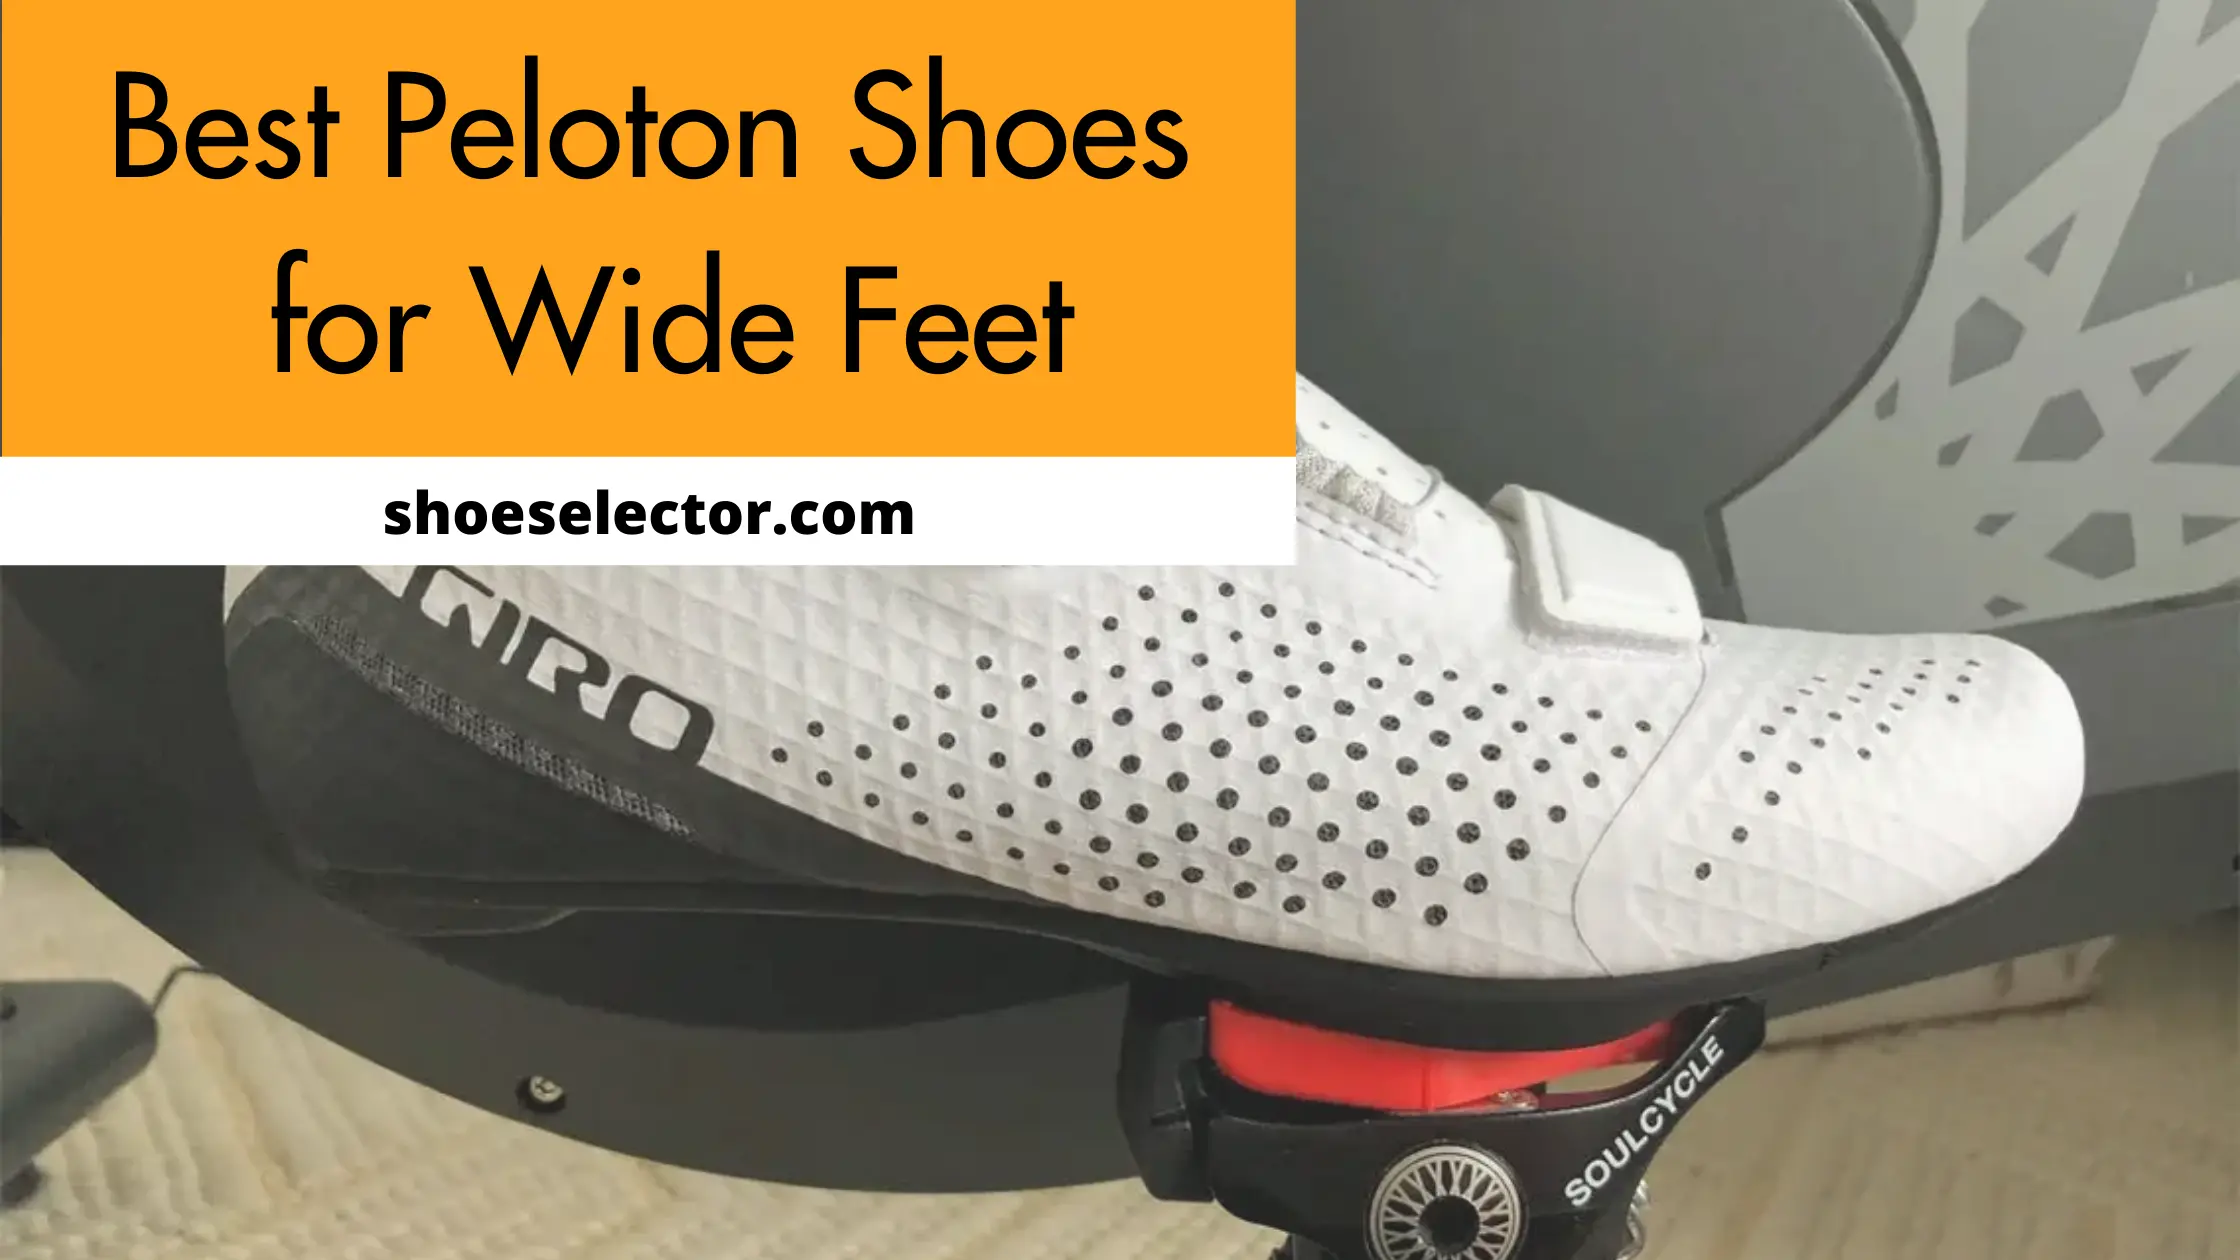 Best Peloton Shoes For Wide Feet - Complete Shopping Tips